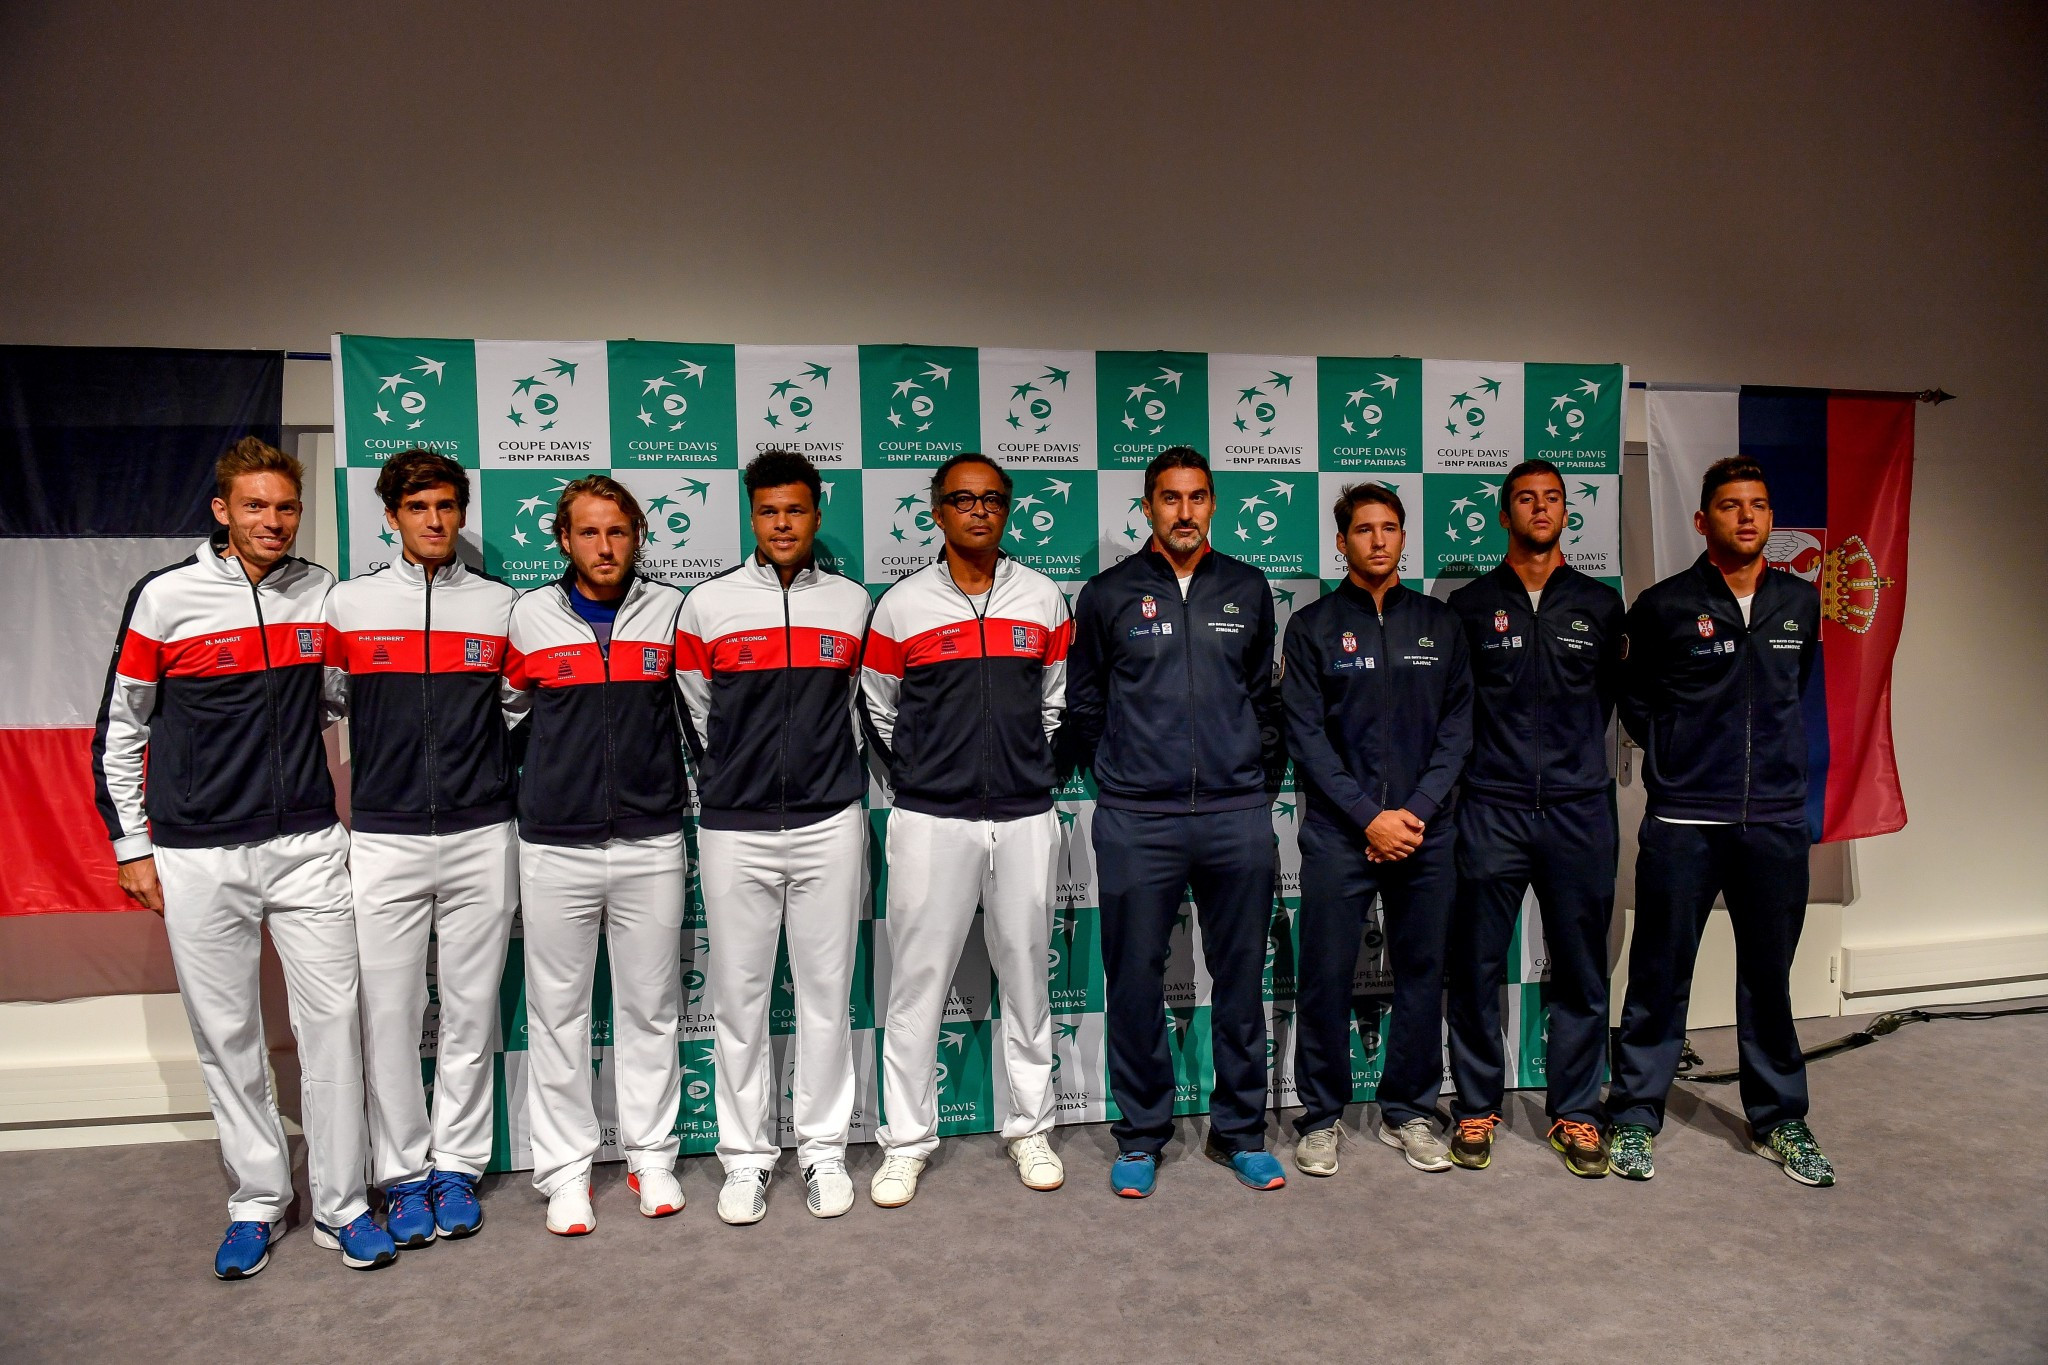 Four nations ready to contest 2017 Davis Cup semi-finals